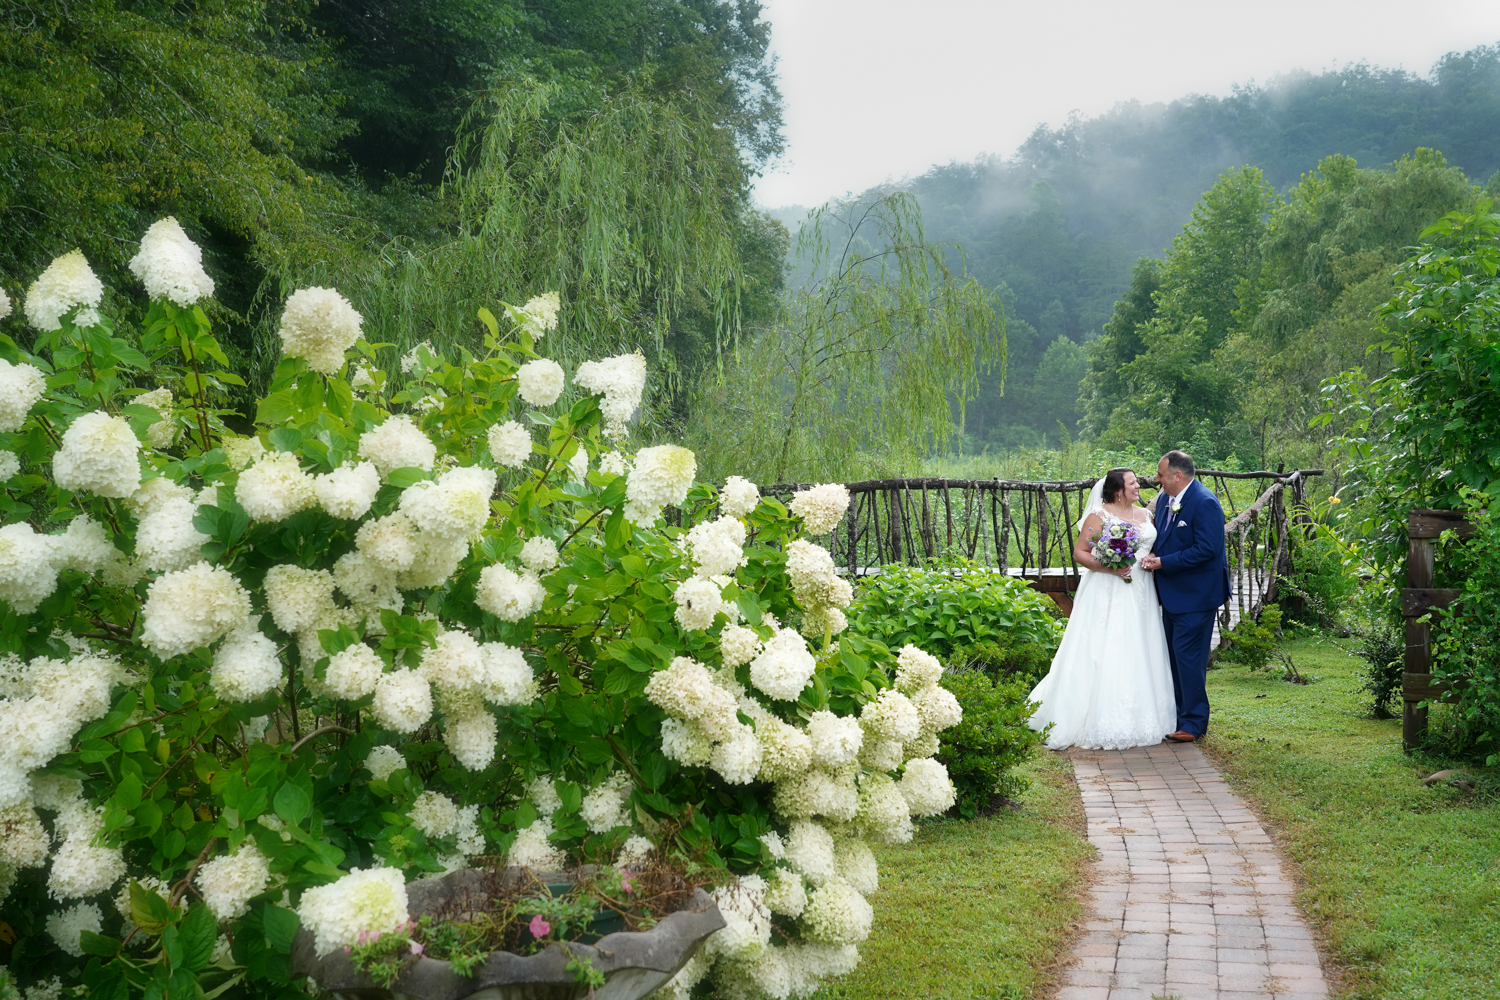 couple walking along stone path on their wedding day in a summer garden with limelight hydrangea in bloom